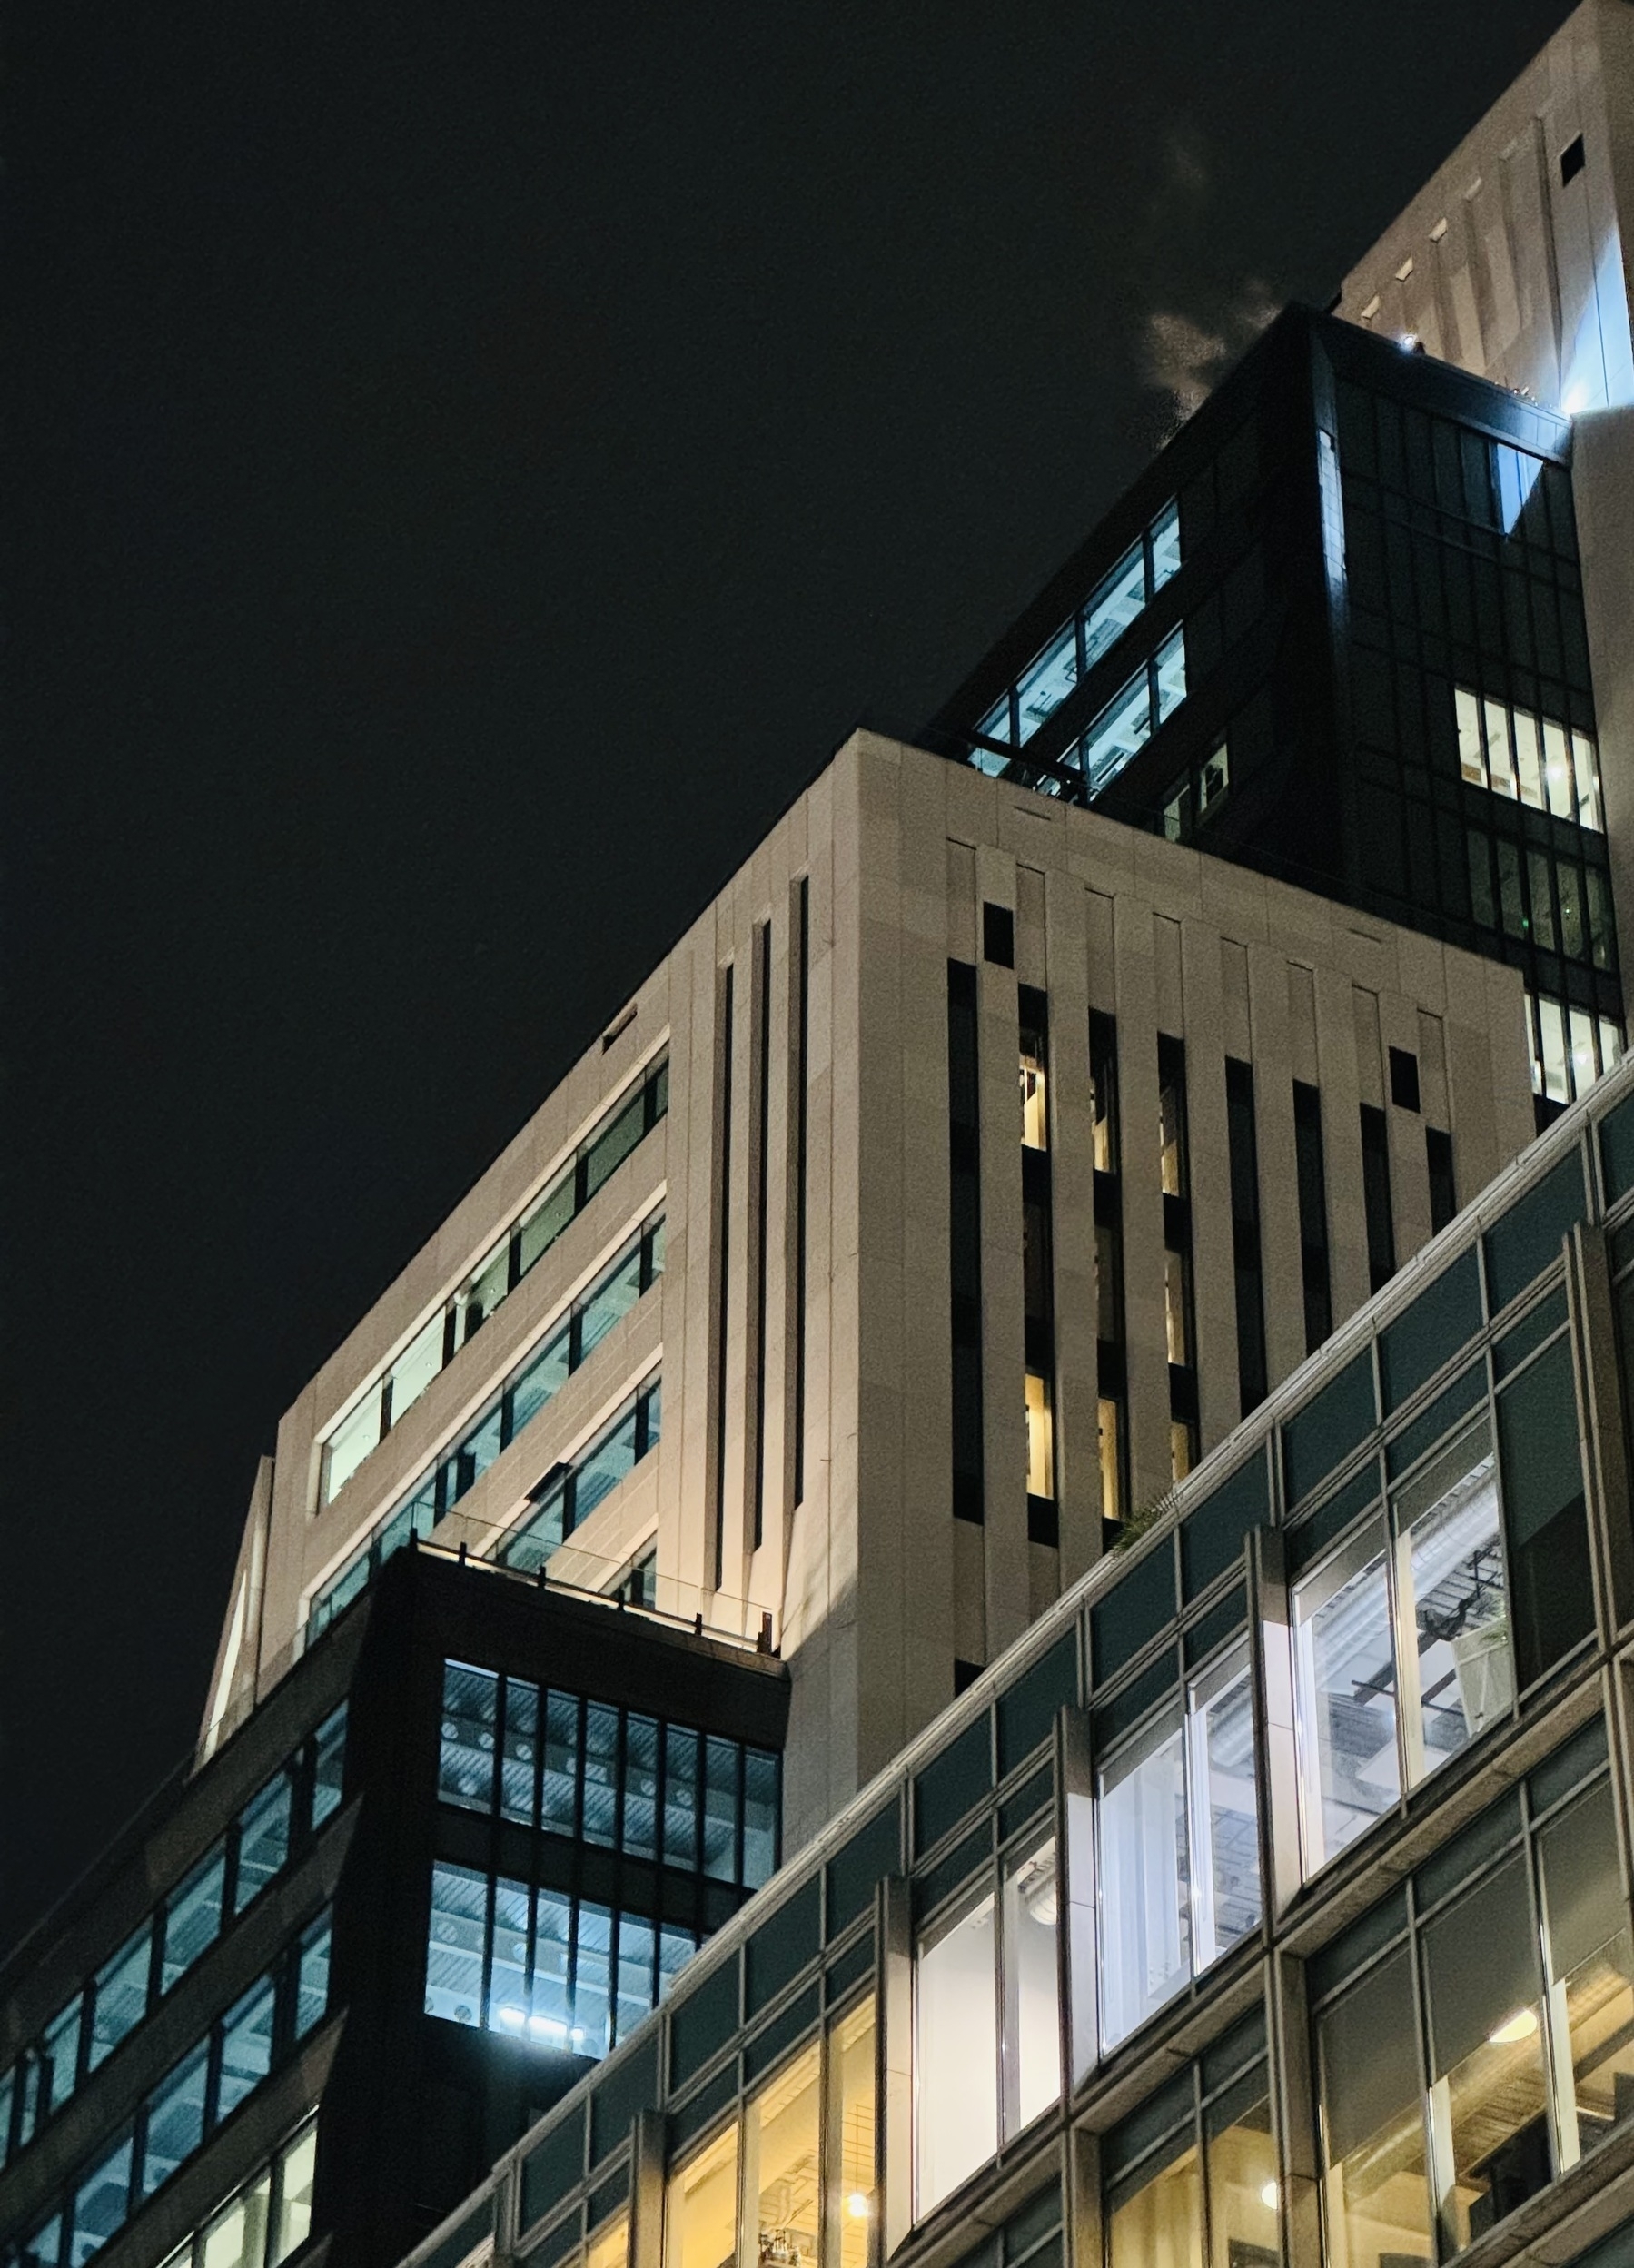 Looking up at a building at night, with alternating black and white segments stepping back as they rise.